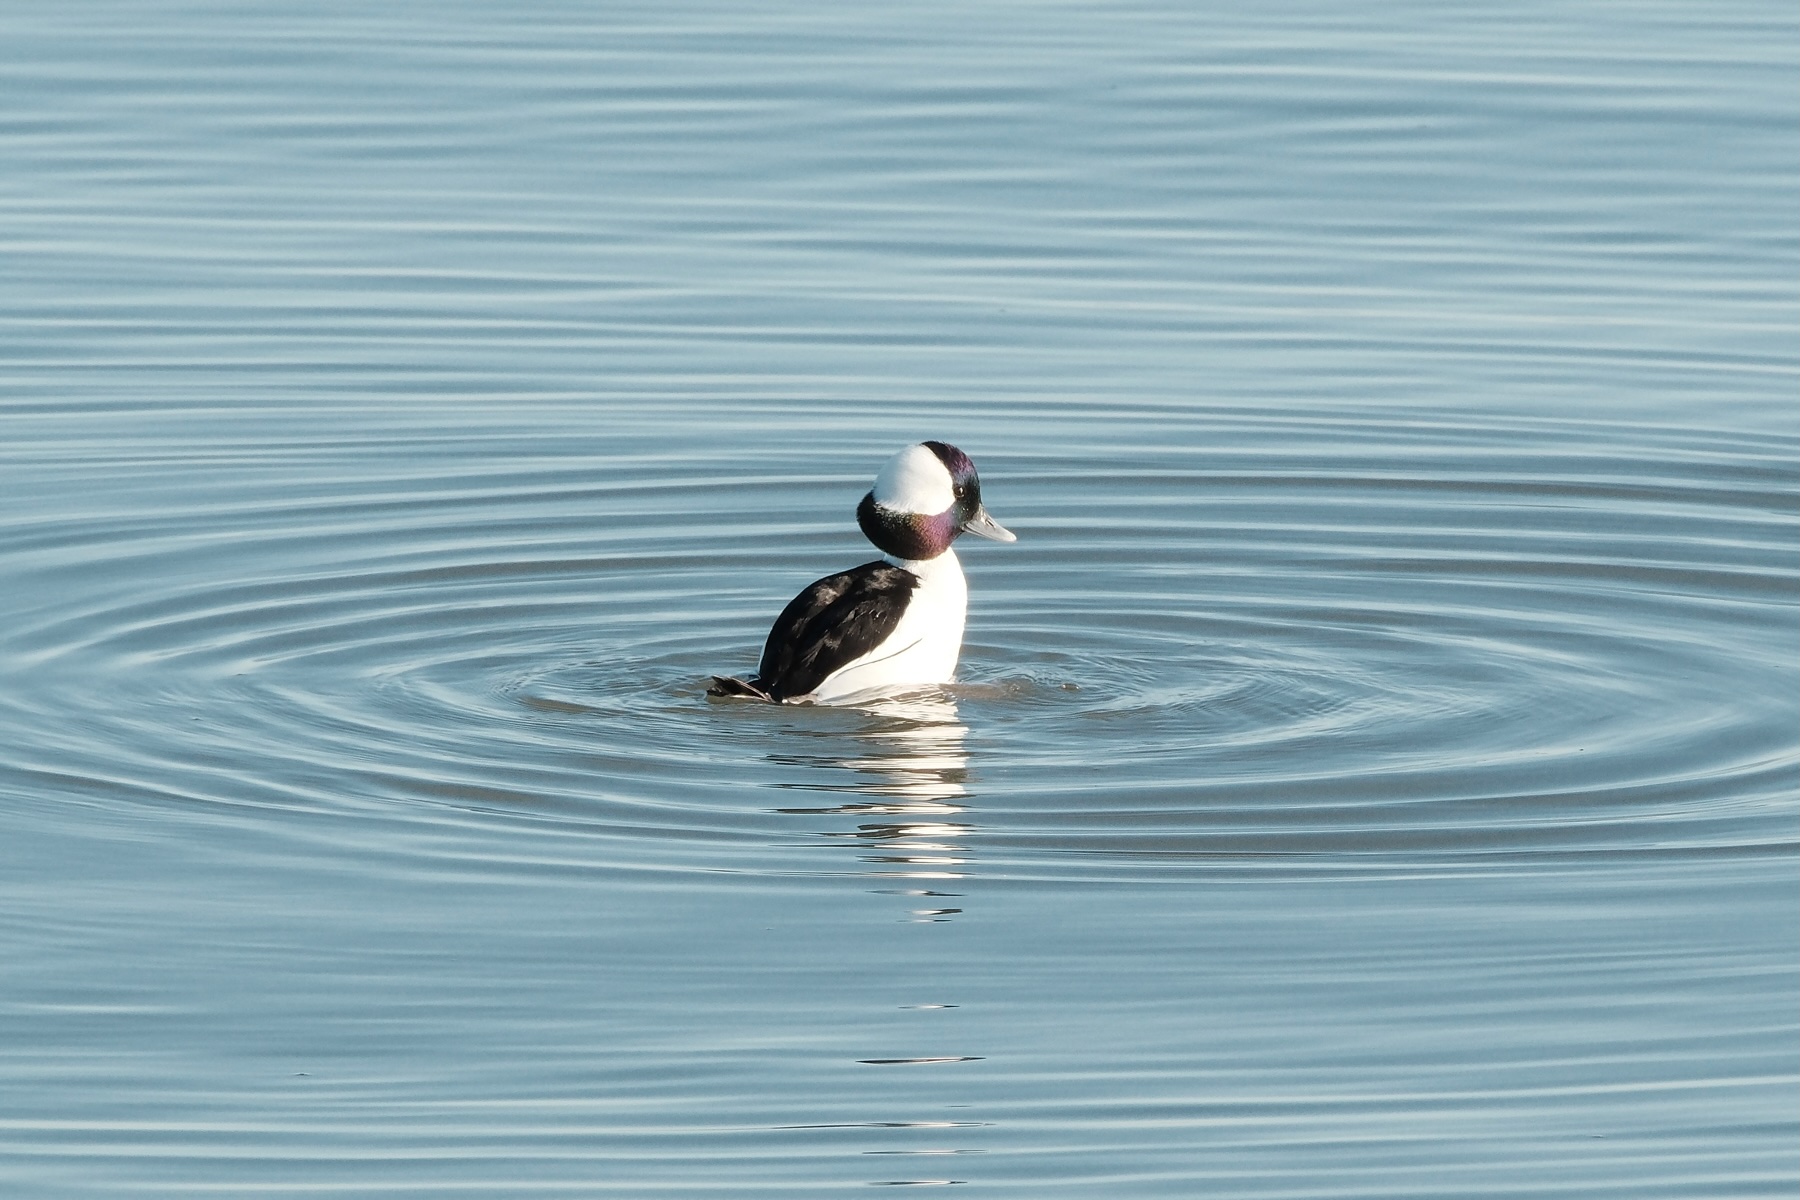 A Bufflehead bobbing out of the water with ripples flowing away. The Bufflehead has a white rear head, chest, belly. Its forehead, chin, and back are black. Its head appears misshapen like a bullhead 